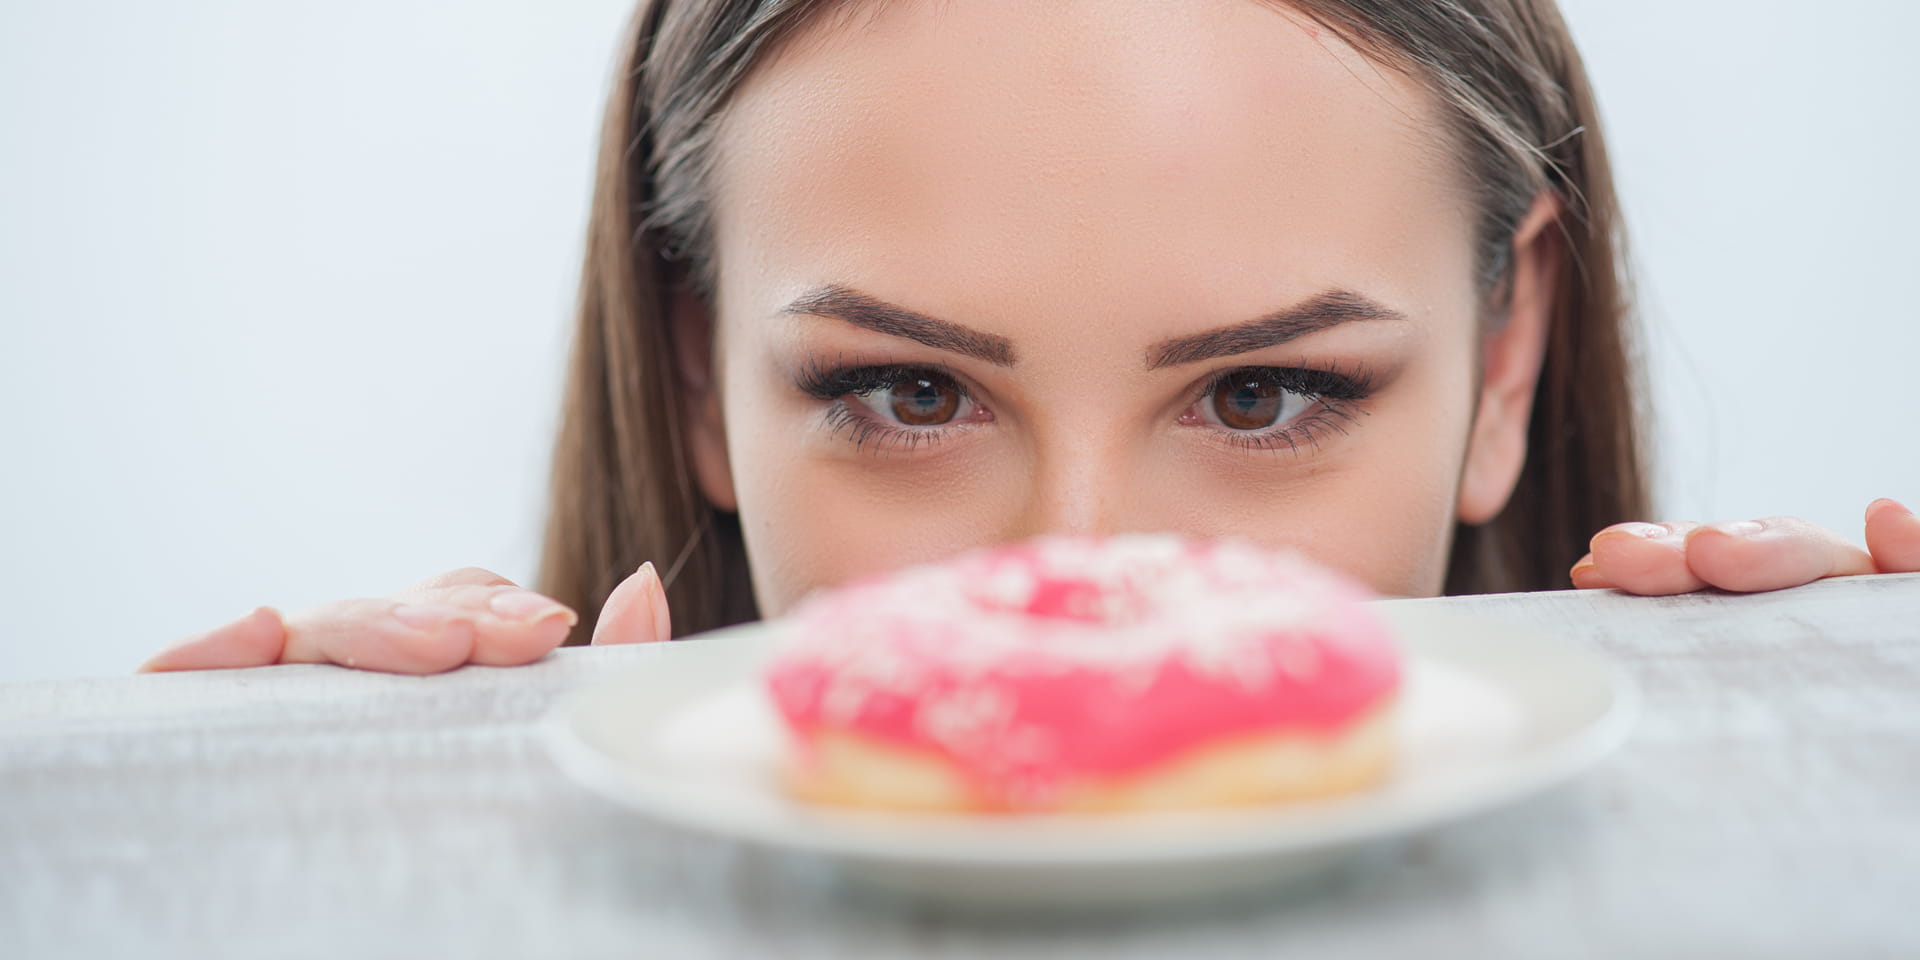 Control cravings for unhealthy desserts